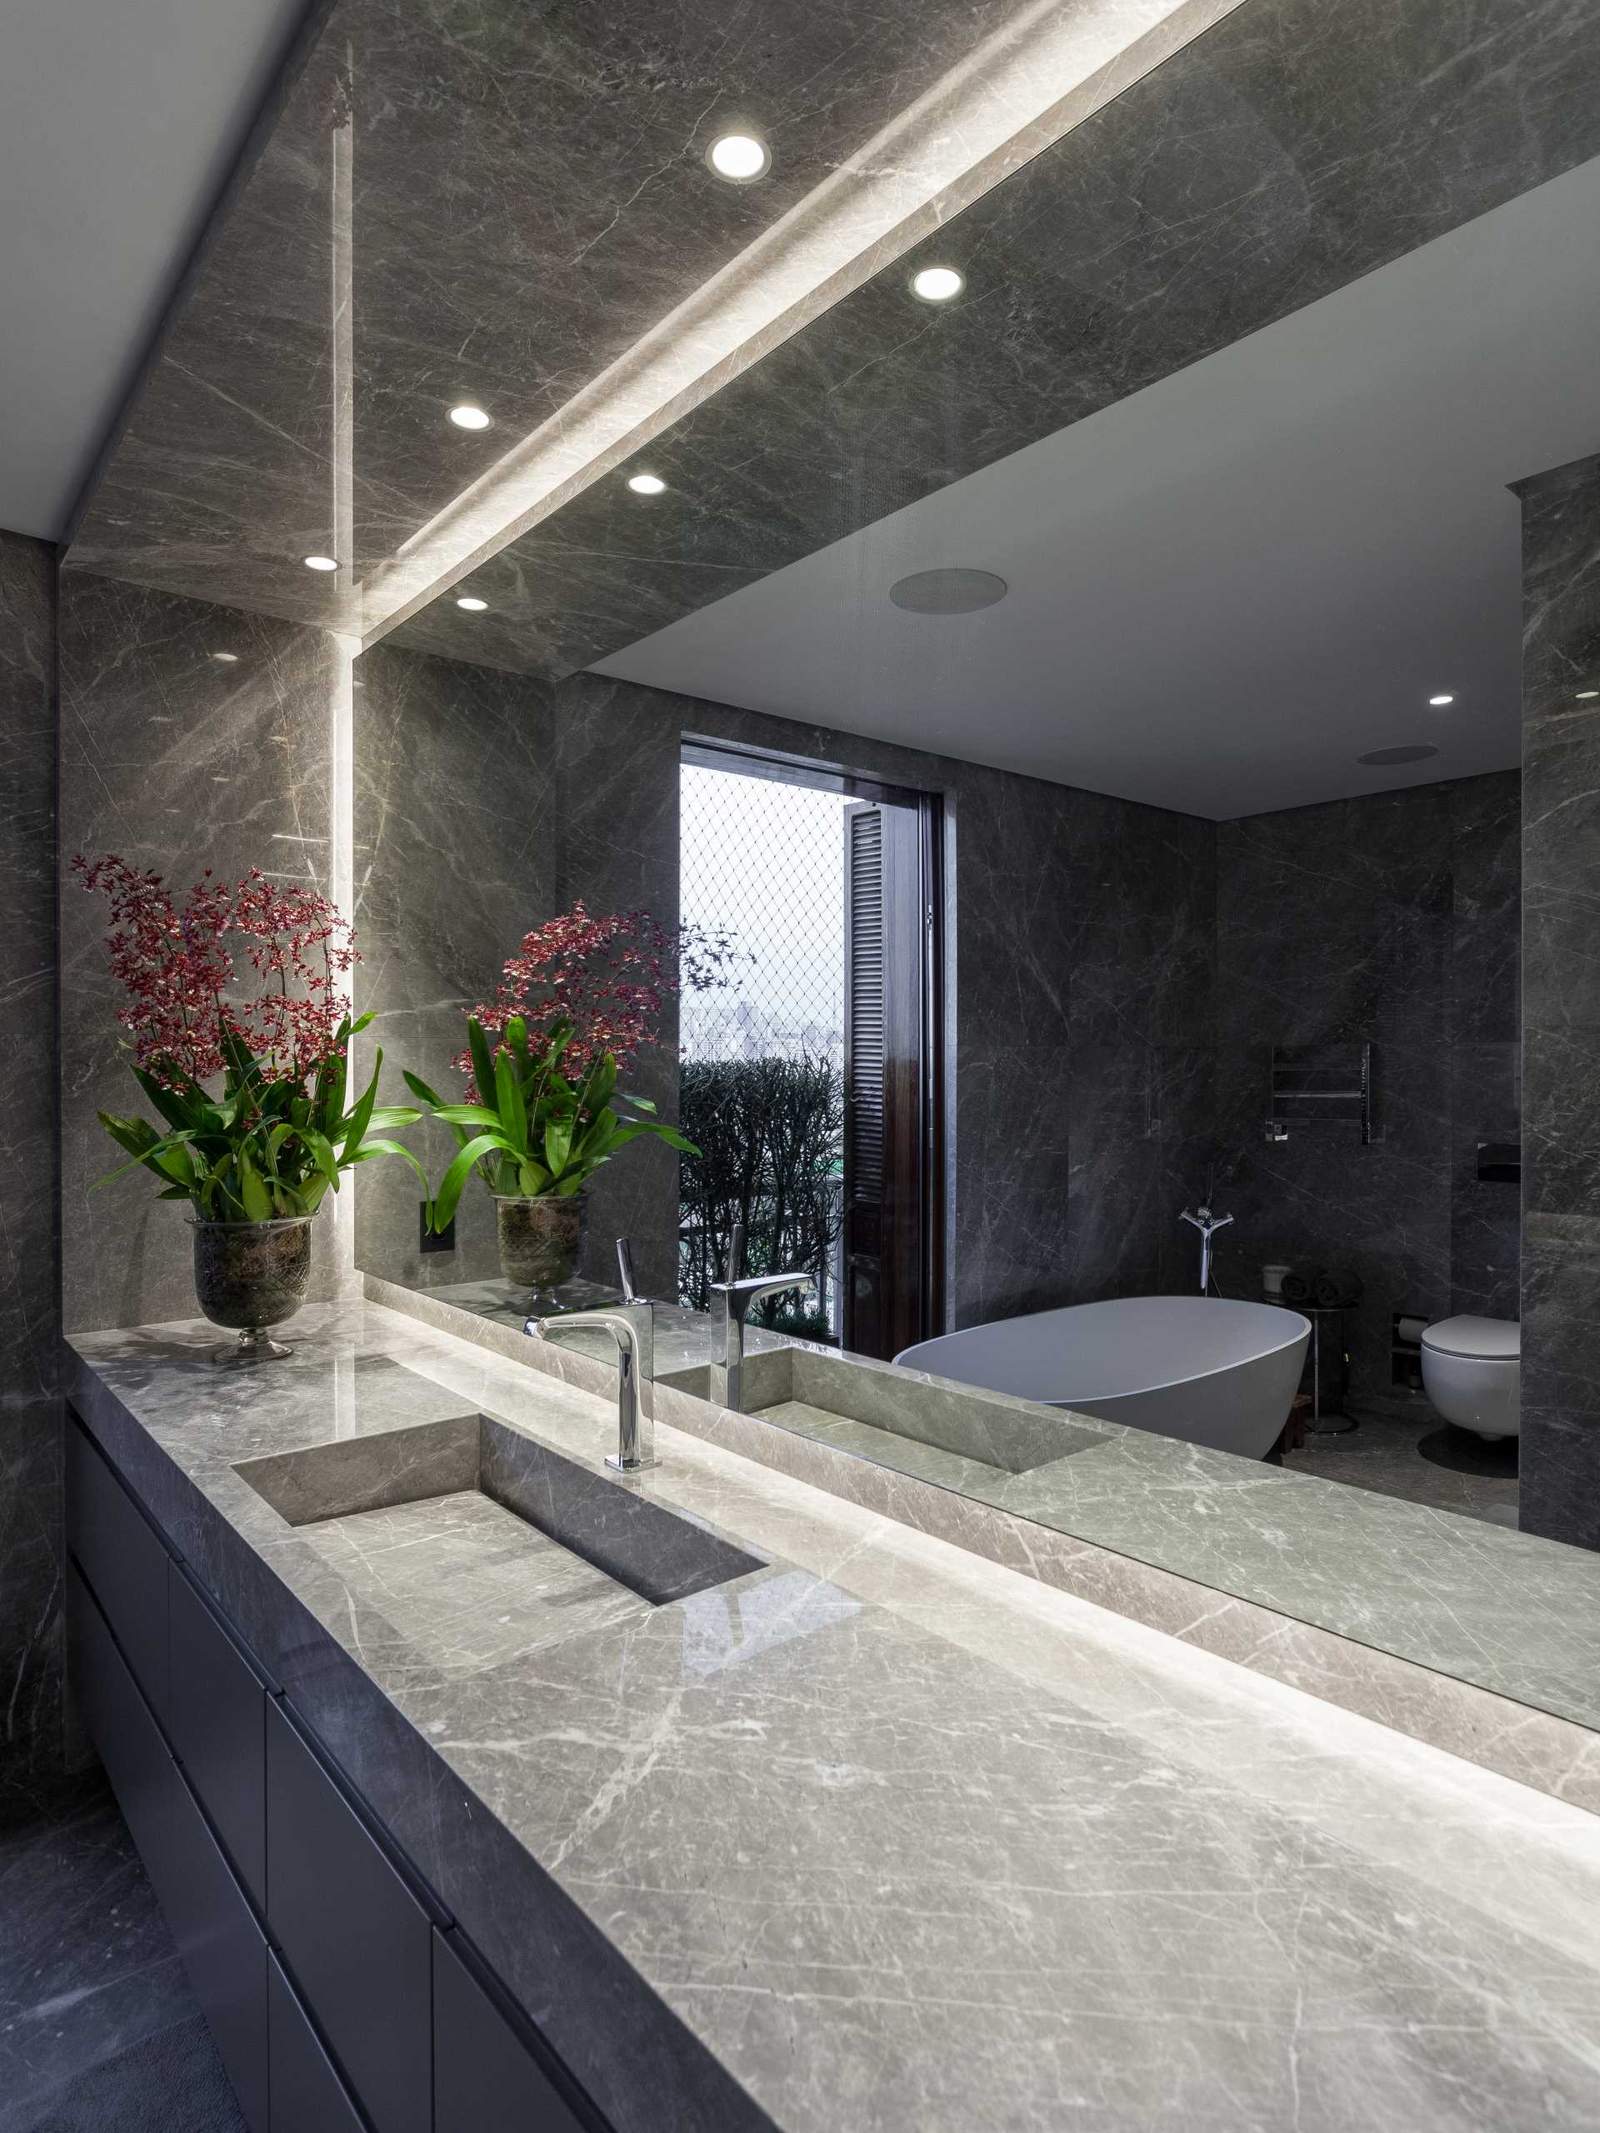 This modern bathroom includes a vanity with built-in sink, a walk-in shower with a bench and shower niche, as well as a freestanding white bathtub by the window.